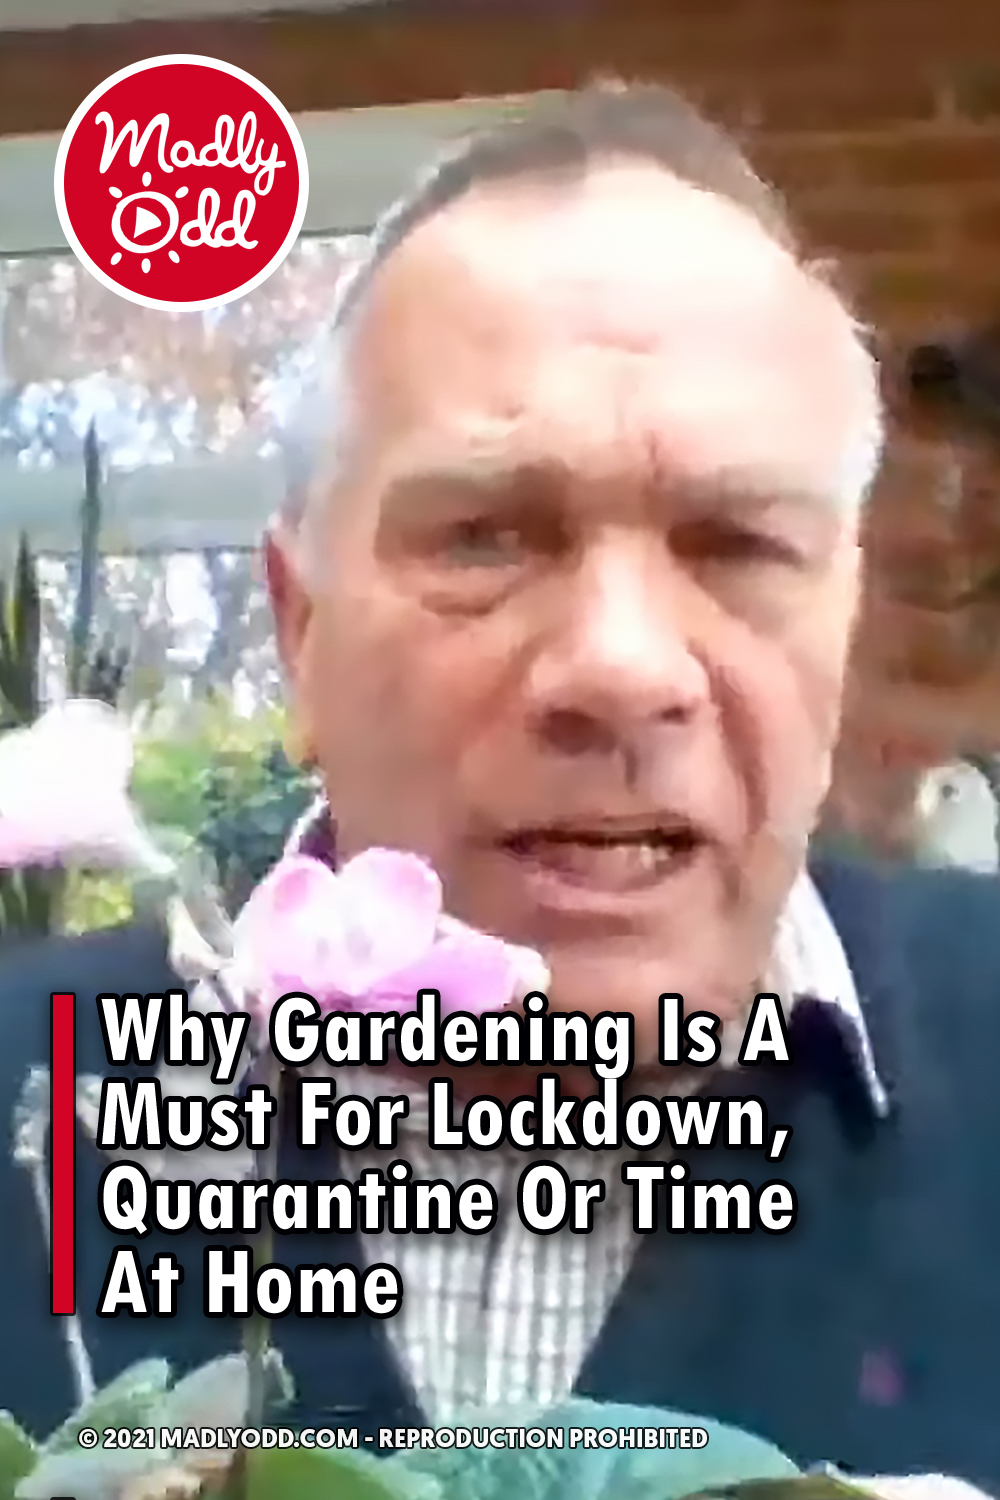 Why Gardening Is A Must For Lockdown, Quarantine Or Time At Home